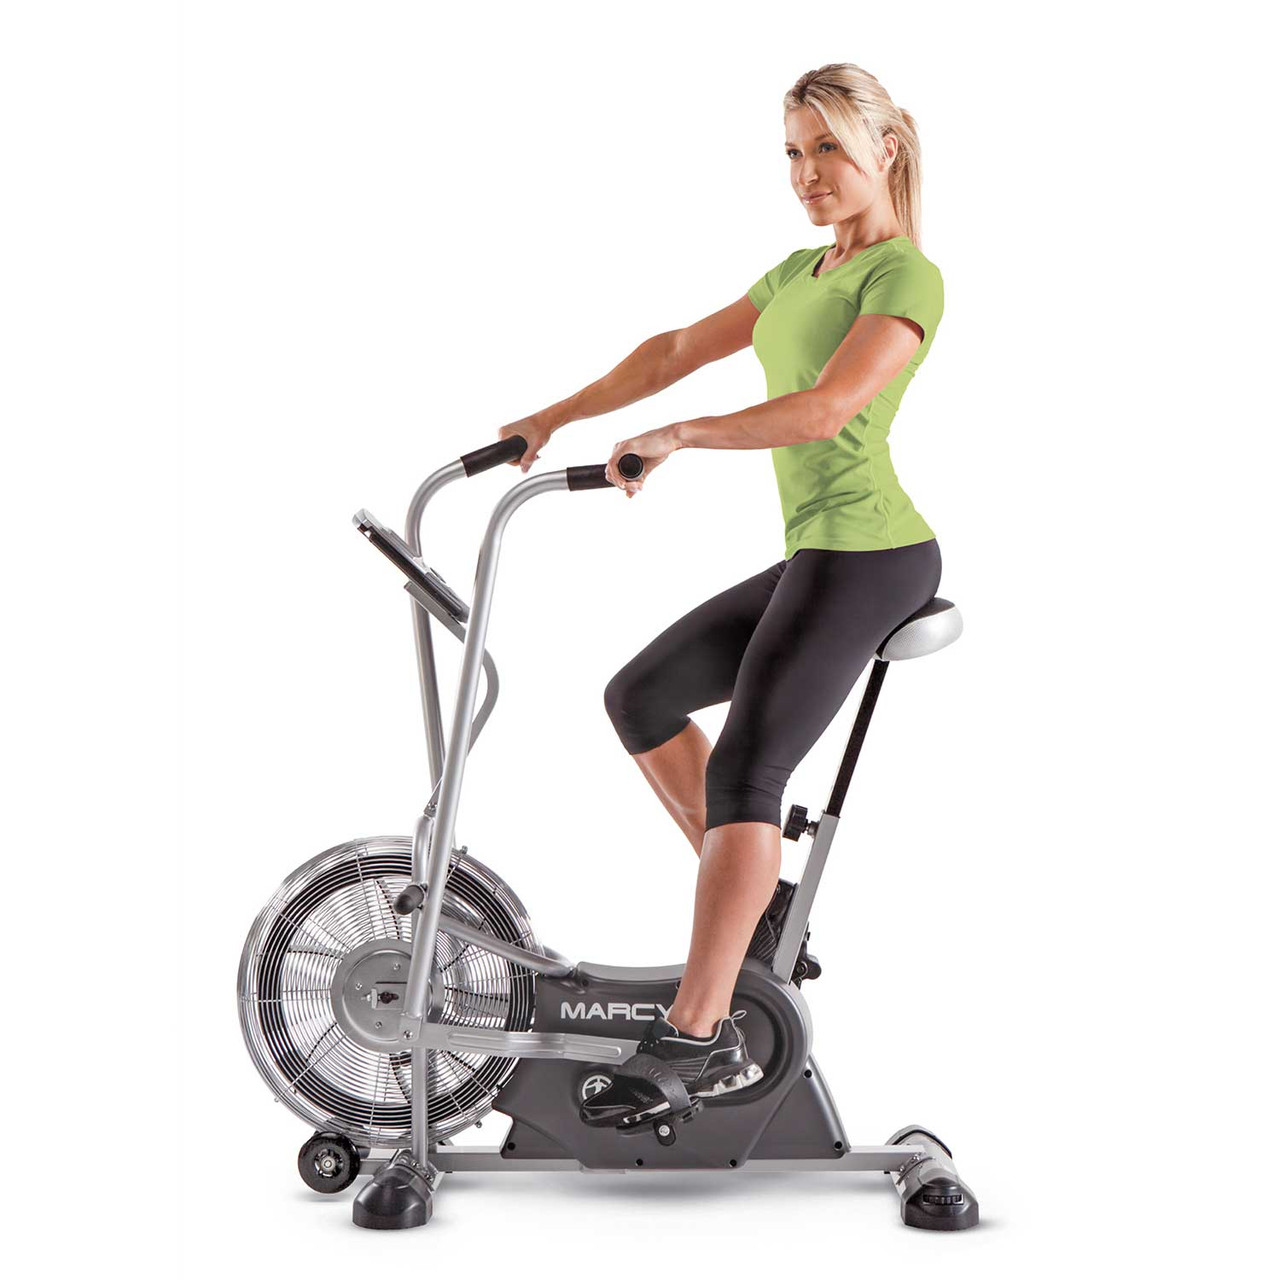 Marcy Deluxe Fan Bike Air 1 Provides The Best Cardio Workout